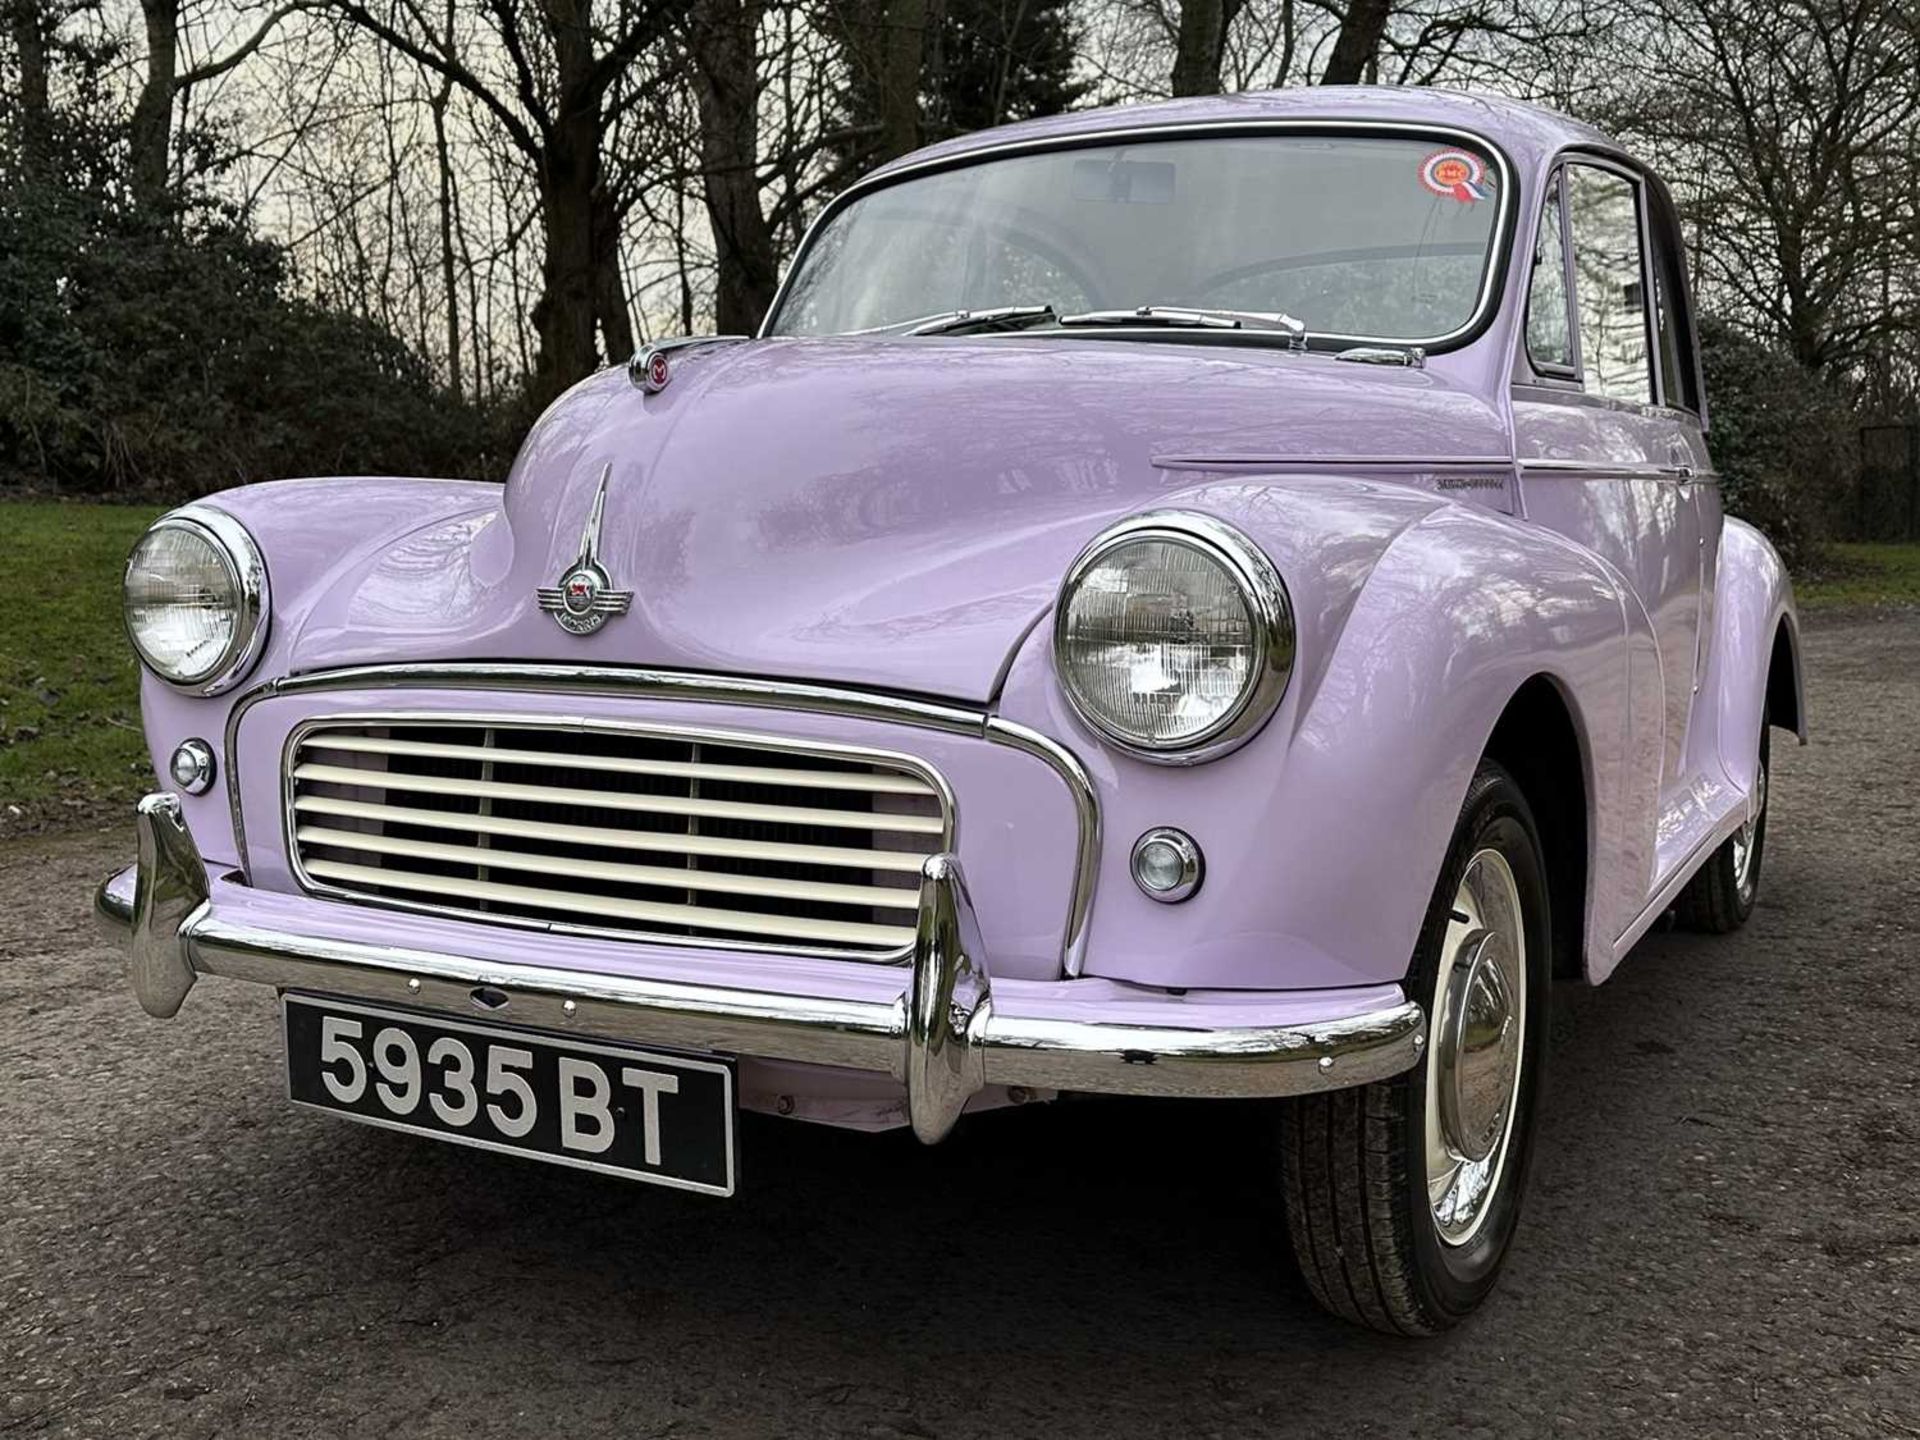 1961 Morris Minor Million 179 of 350 built, fully restored, only three owners from new - Image 5 of 100